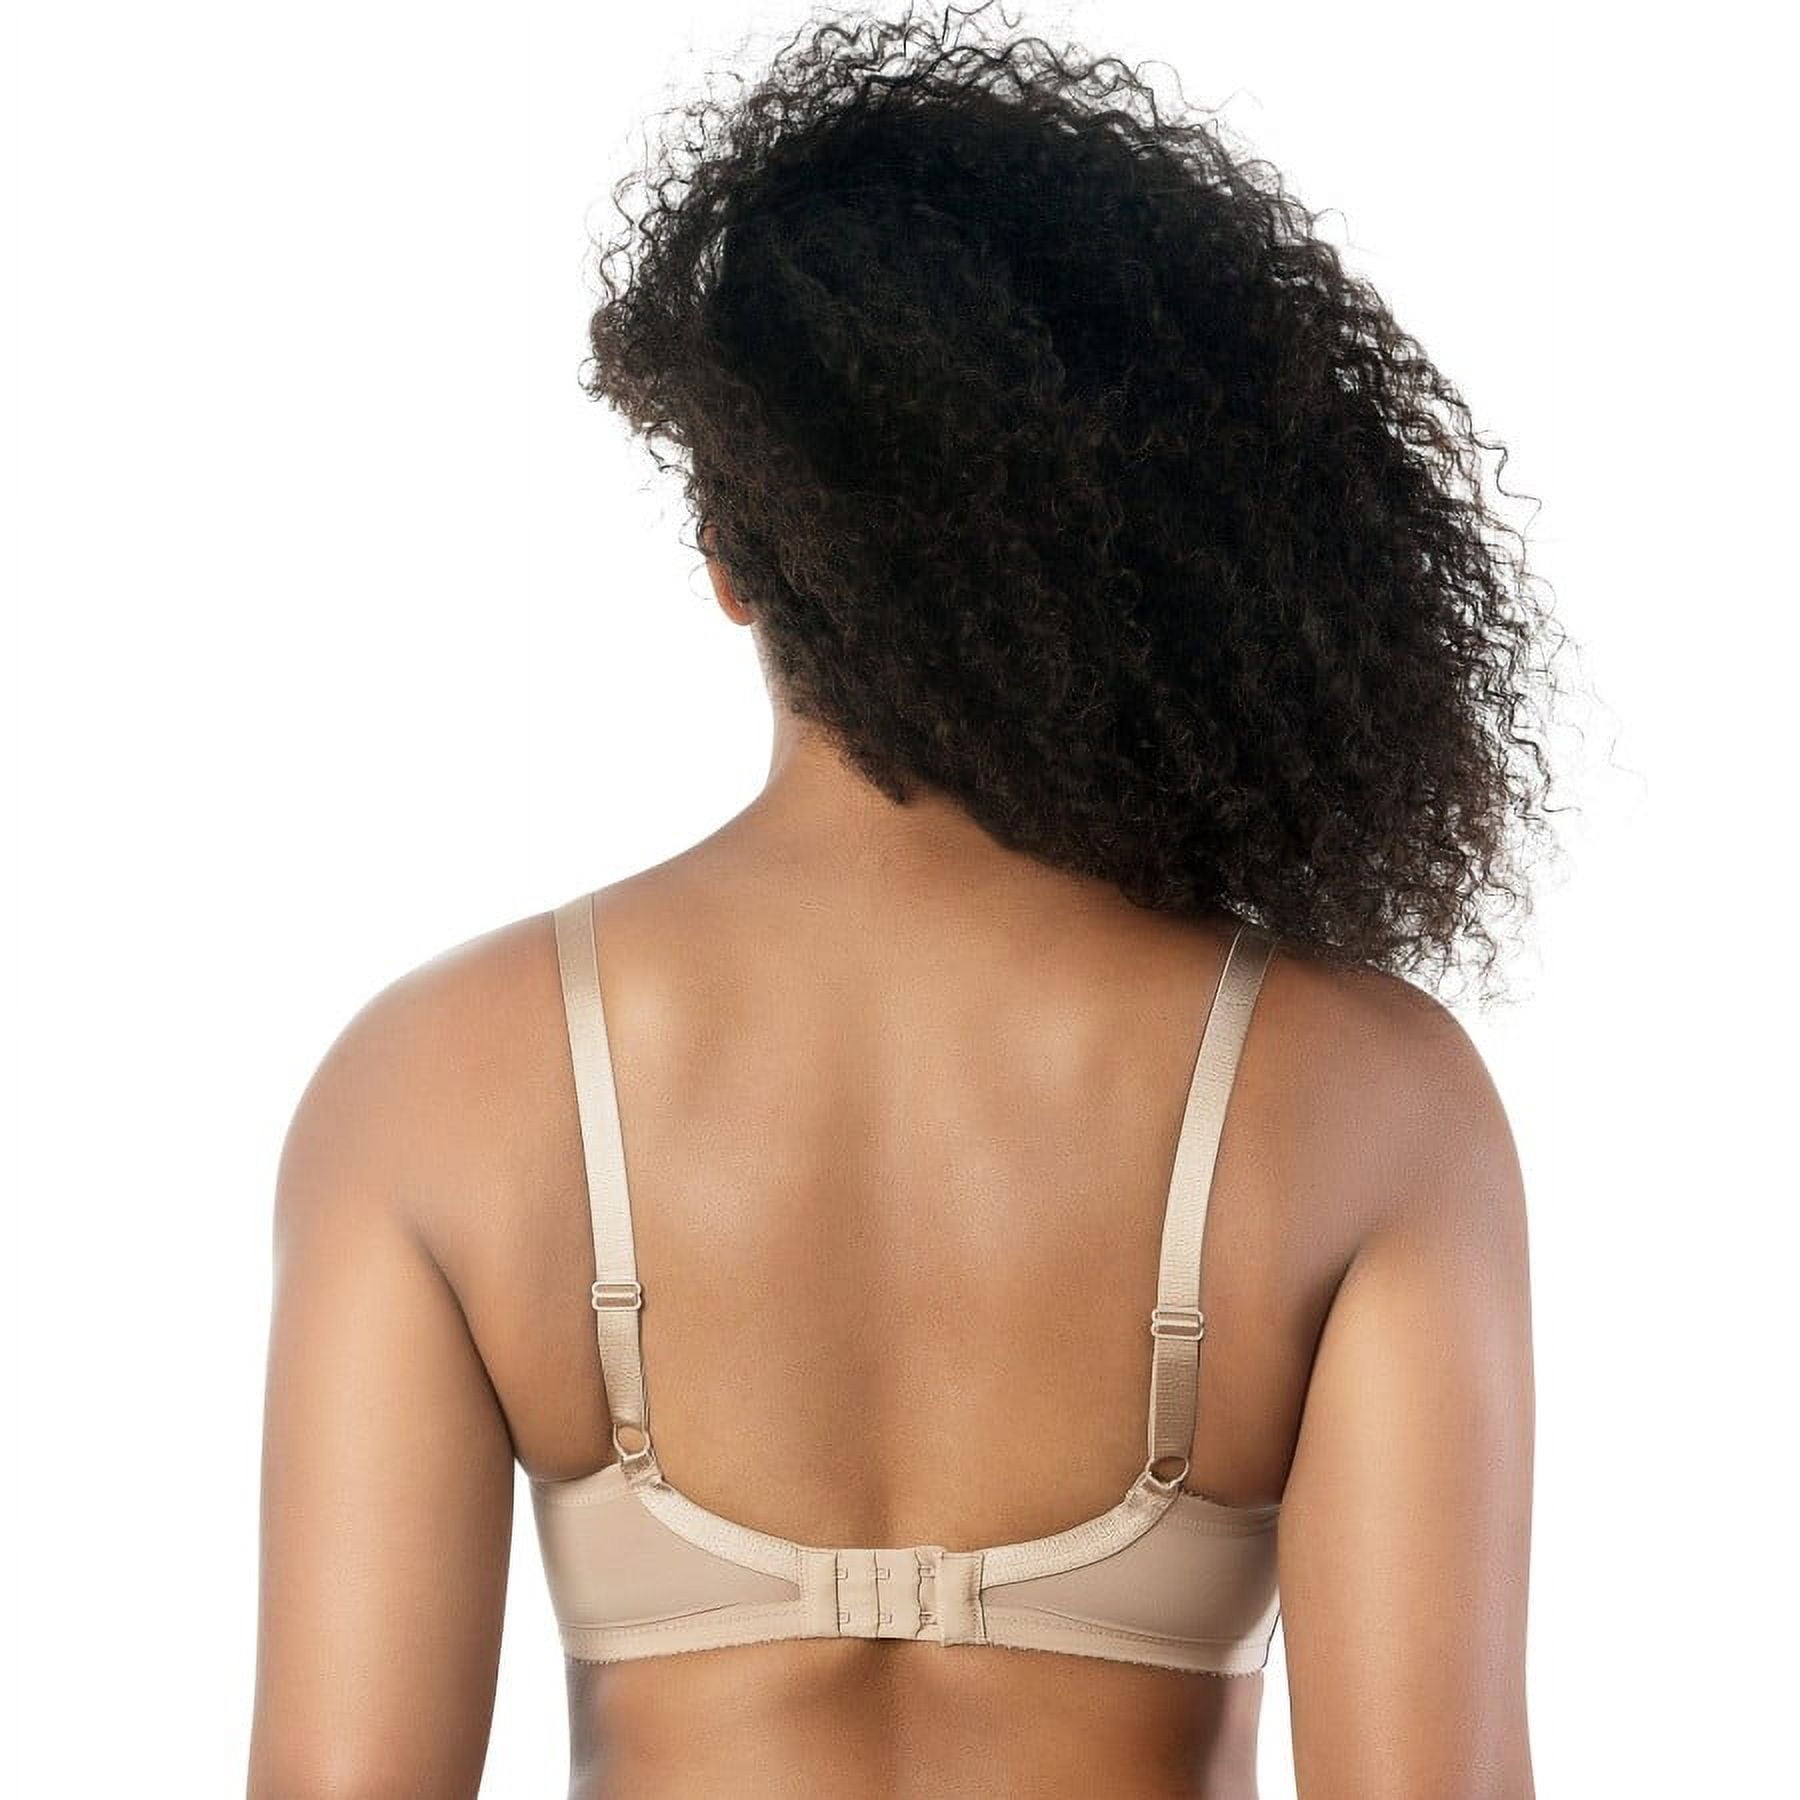 The perfect bra feels like CUUP.” Tina wears the Plunge in 32F.